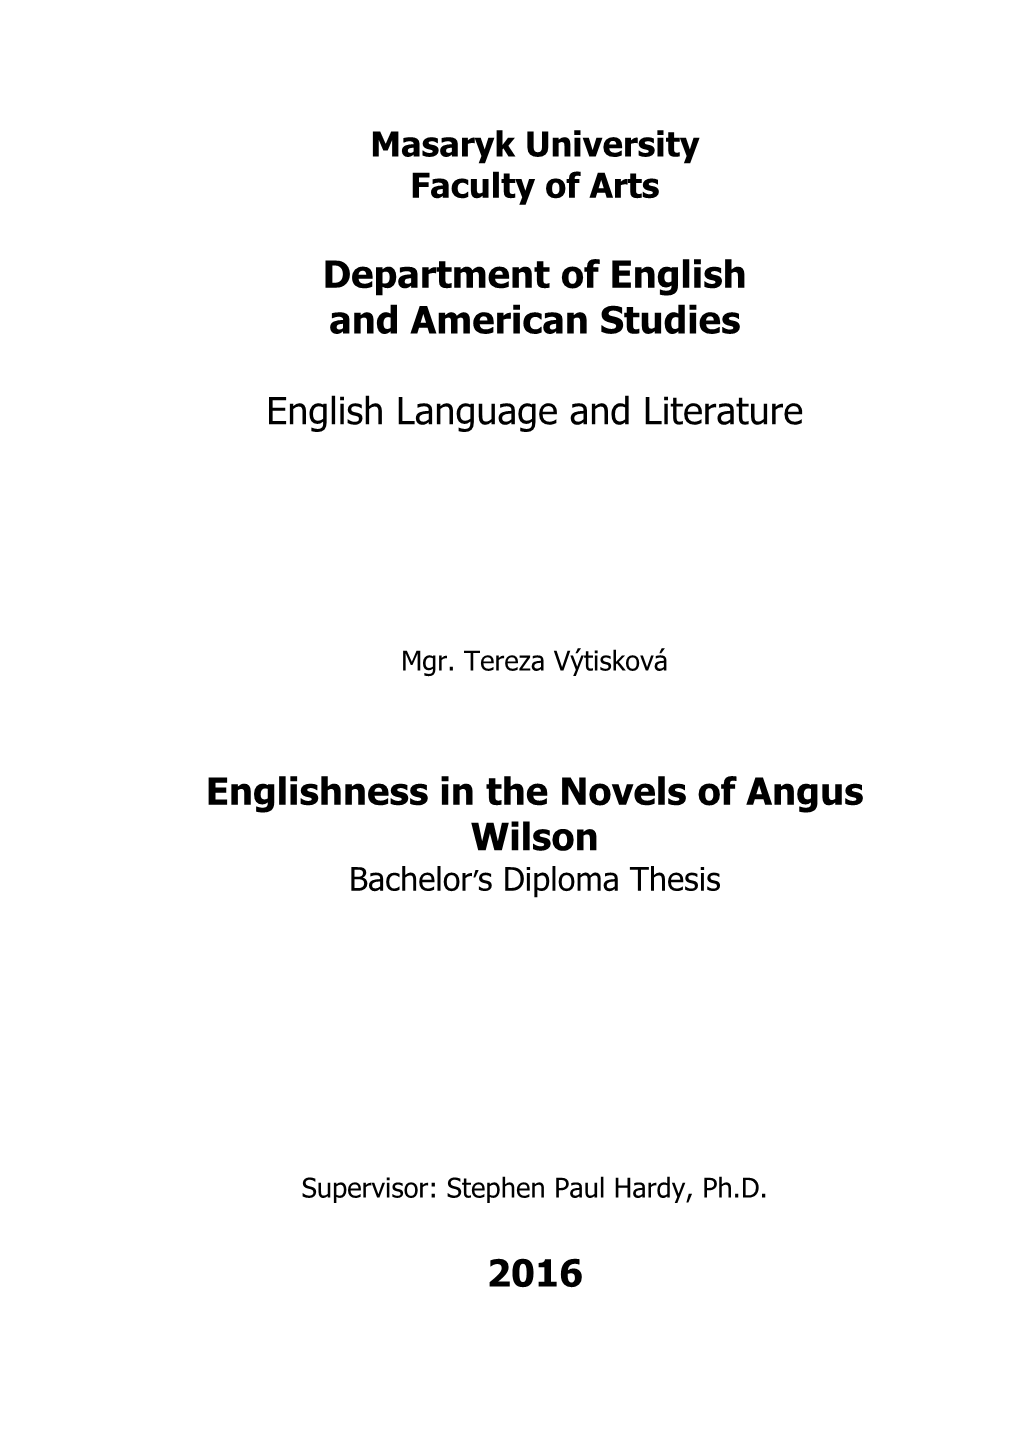 Englishness in the Novels of Angus Wilson Bachelor’S Diploma Thesis